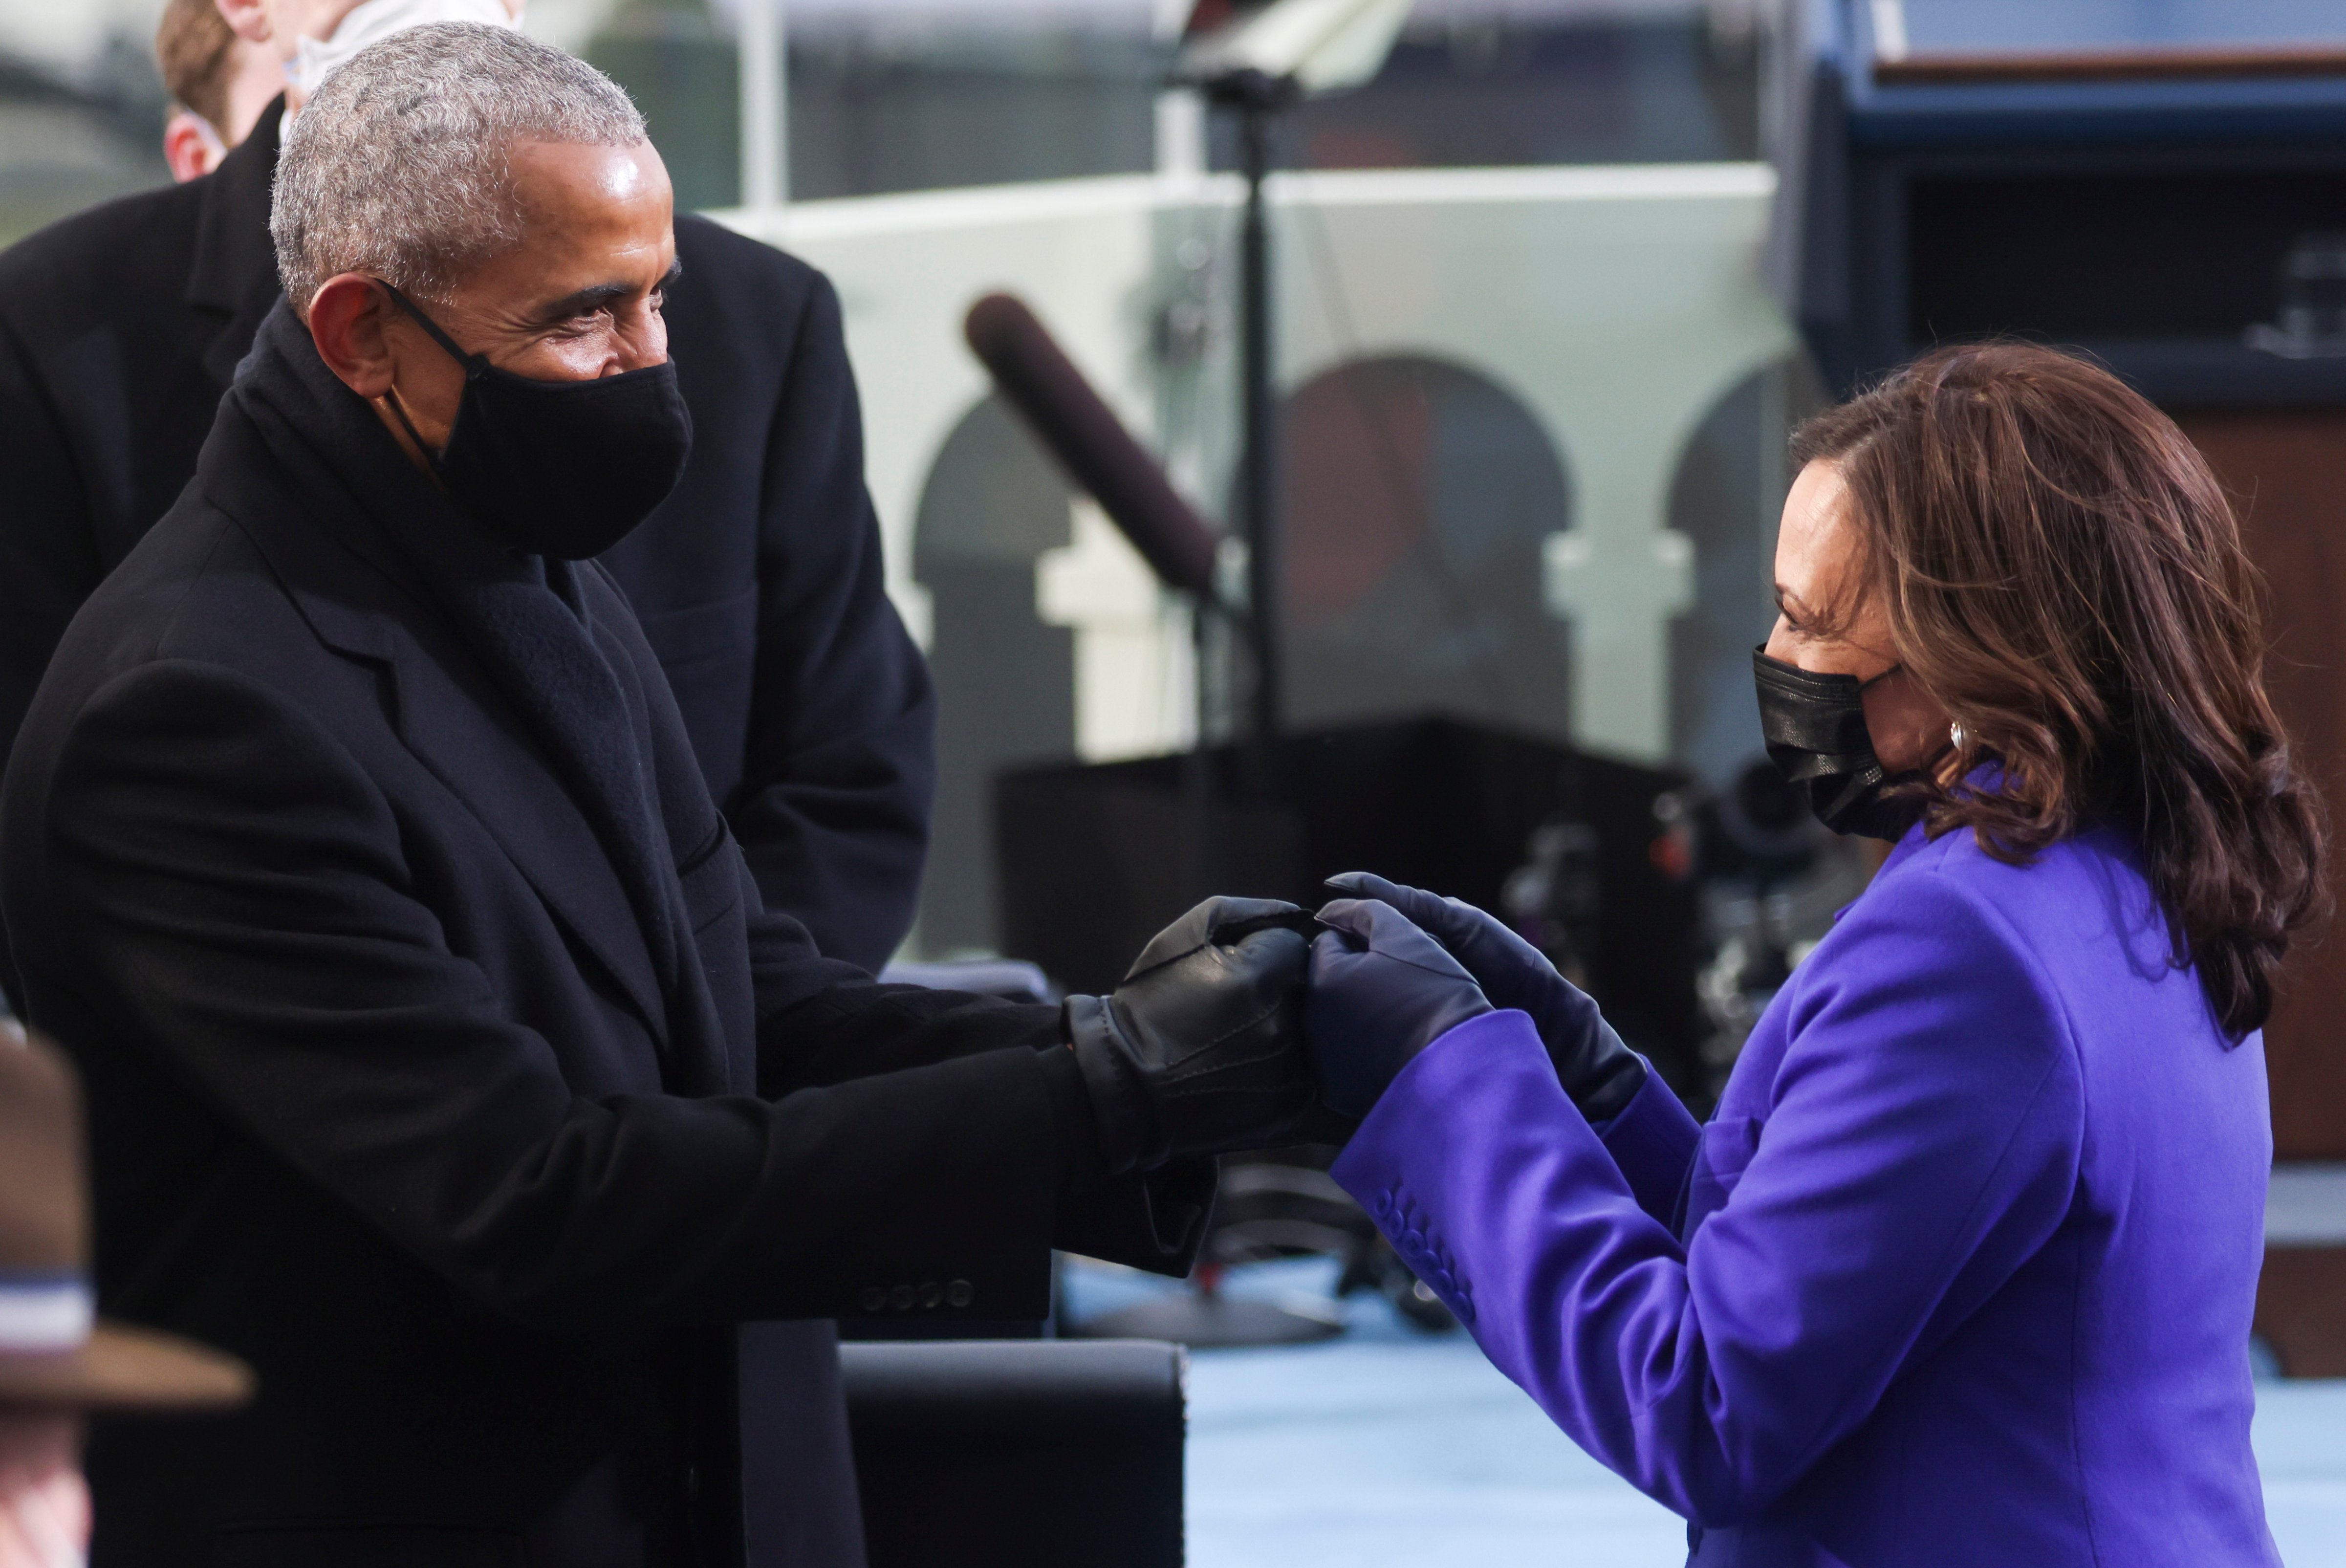 Barack Obama, the nation's first Black President, and Kamala Harris, the nation's first Black and first female Vice President, greet each other at the inauguration of President Joe Biden and Harris in Washington D.C. on Jan. 20, 2021. (Jonathan Ernst—Pool/Getty Images)